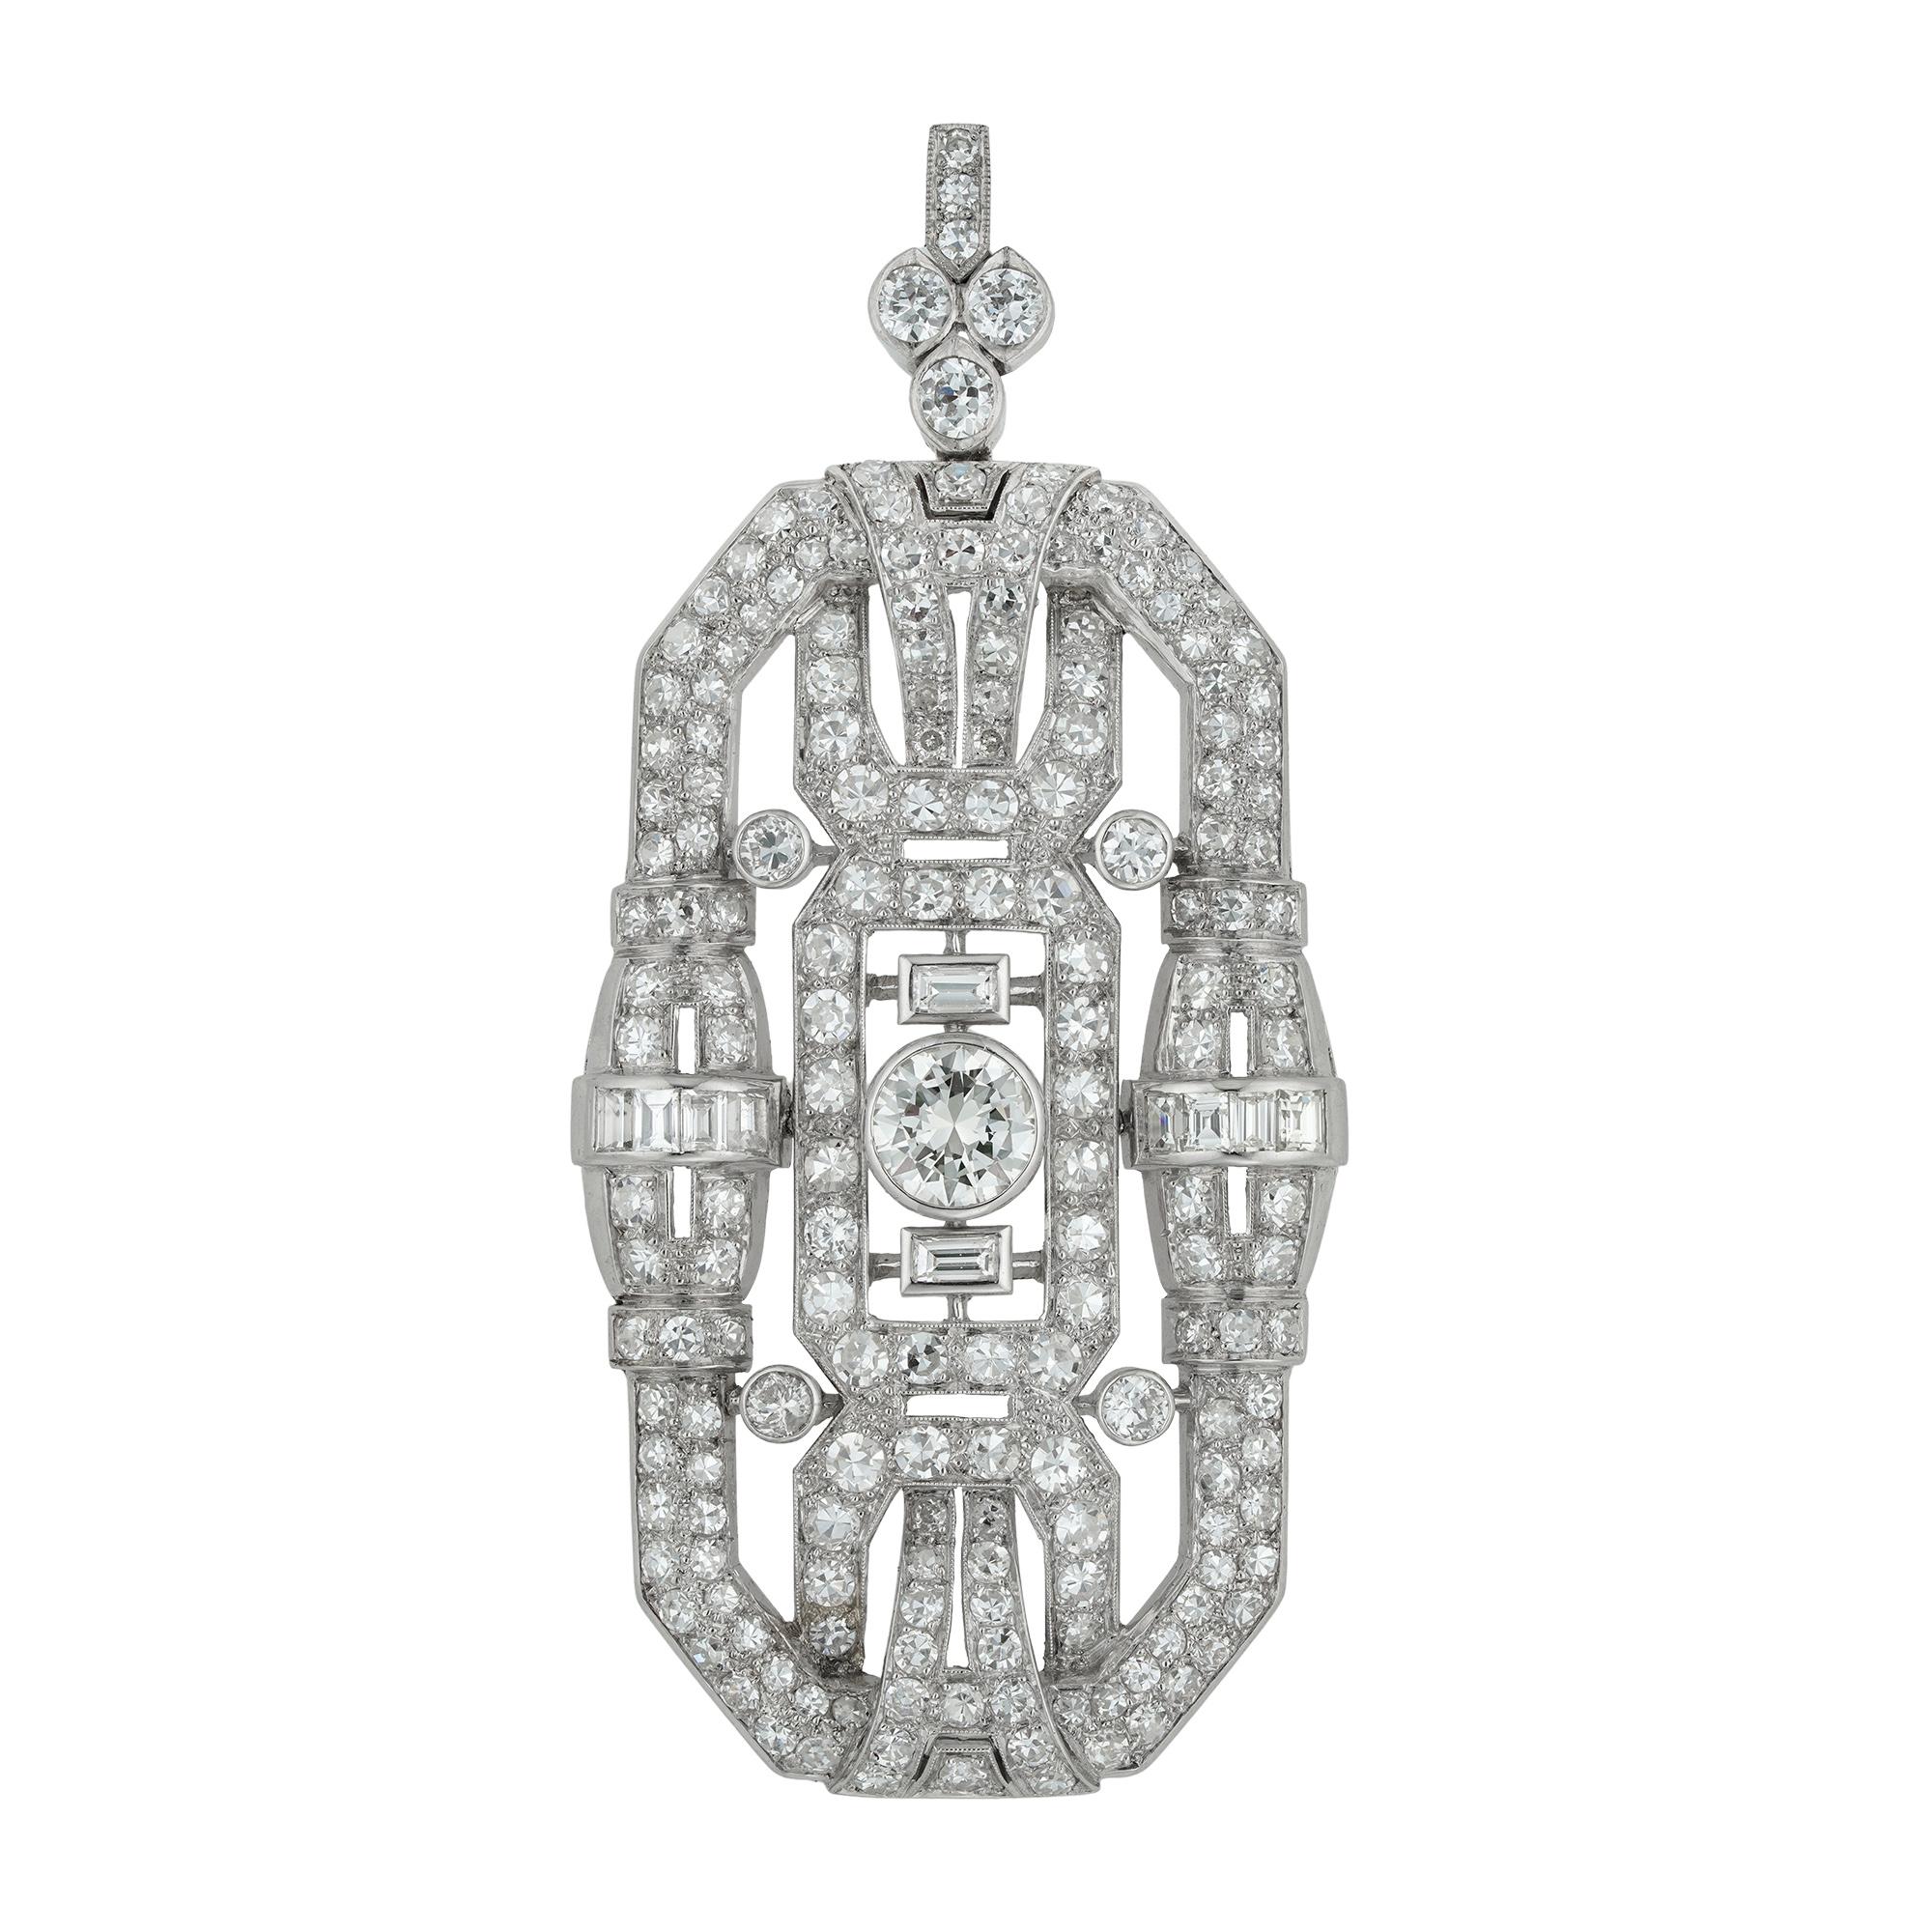 An Important Art Deco diamond-set sautoir, the necklace with rectangular and circular links, all set with old brilliant and swiss-cut diamonds, suspending a pendant centrally-set with a transition brilliant-cut diamond estimated to weigh 1.5 carats,